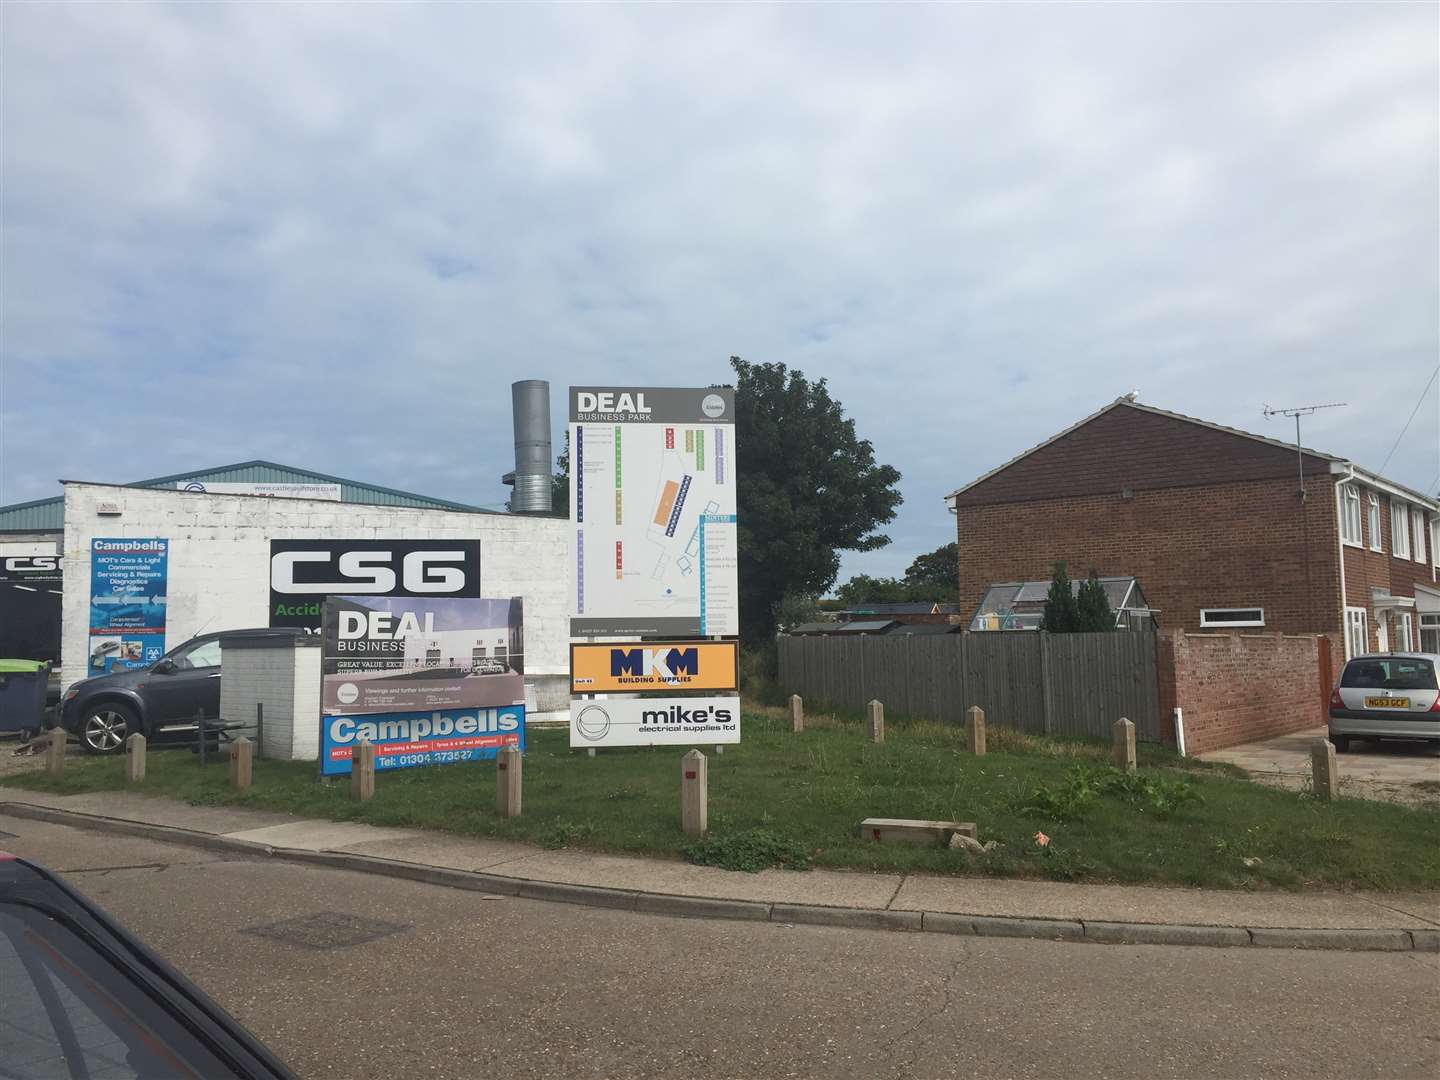 CSG Accident Repair Centre is situated directly behind Mr and Mrs Burke's home in Southwall Road, Deal